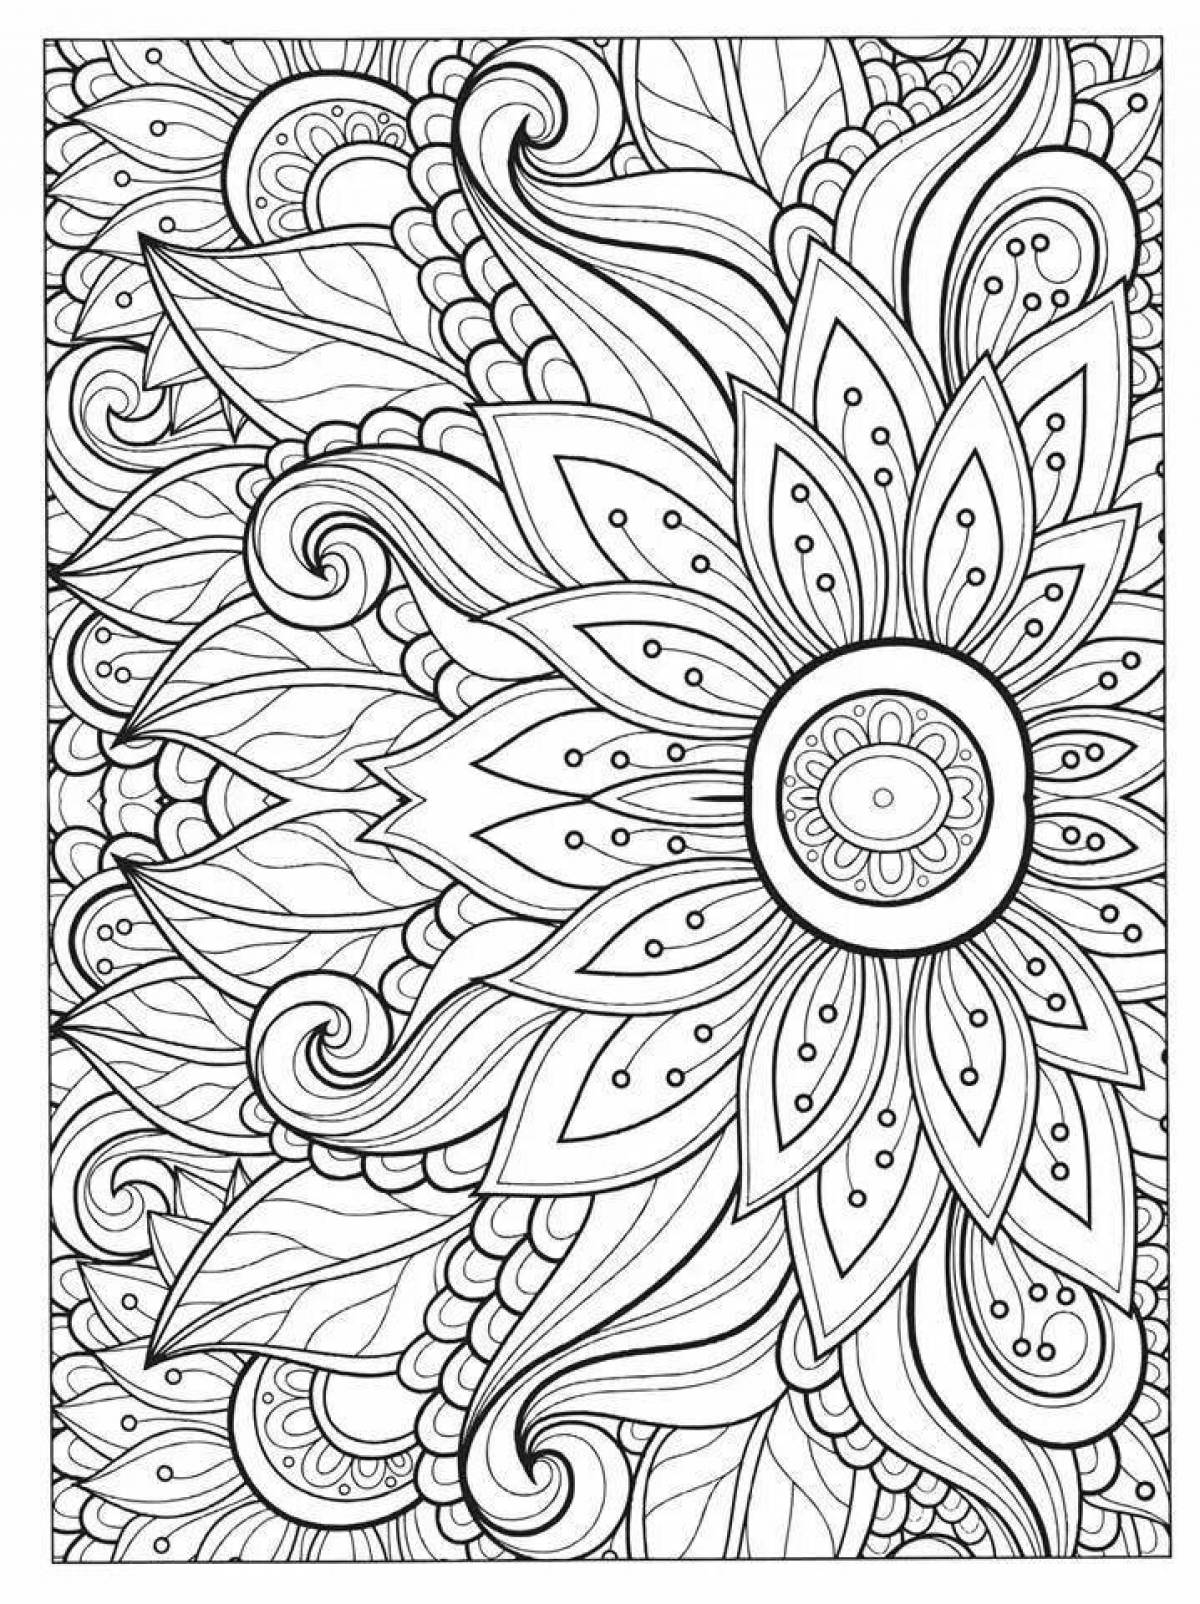 Exquisite adult coloring pages